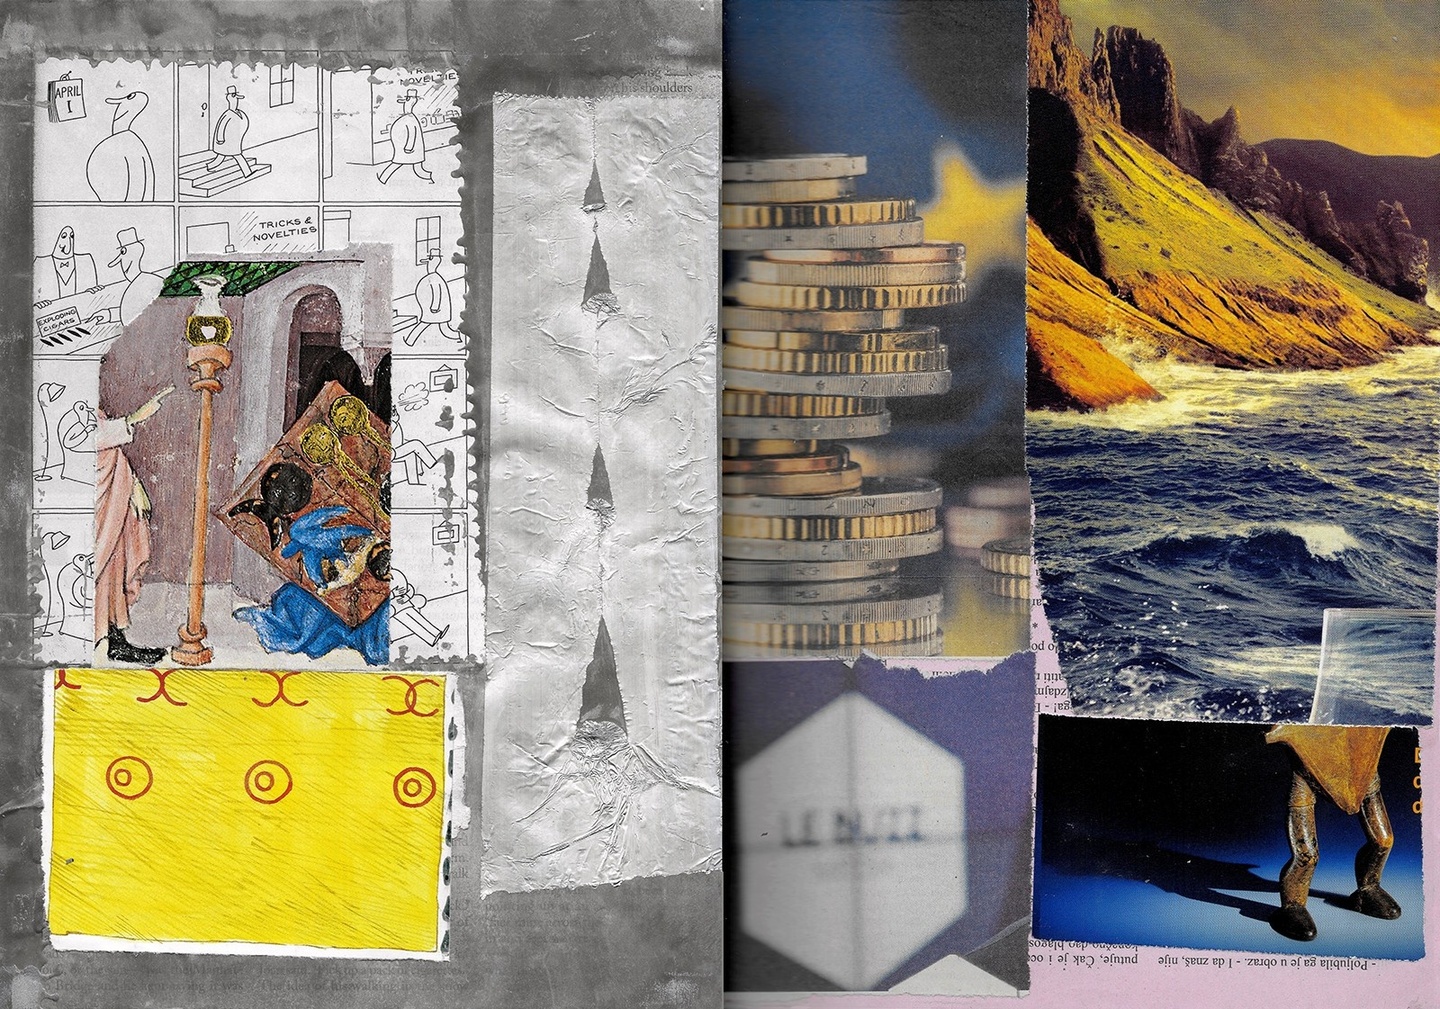 A collage: an illustration of some scene from antiquity on a comic strip (black linework on a white background), both of which are above a yellow composition with red geometric line patterns; a manipulated white texture; photographs of mechanical bits/coins; an out of focus image of some text; a sculpture against a dark background, cropped to show its legs and the long shadow that follows it; and a landscape of a cliffside by the sea. The background of these latter four images is some pink paper with small black text, rotated to be upside down.